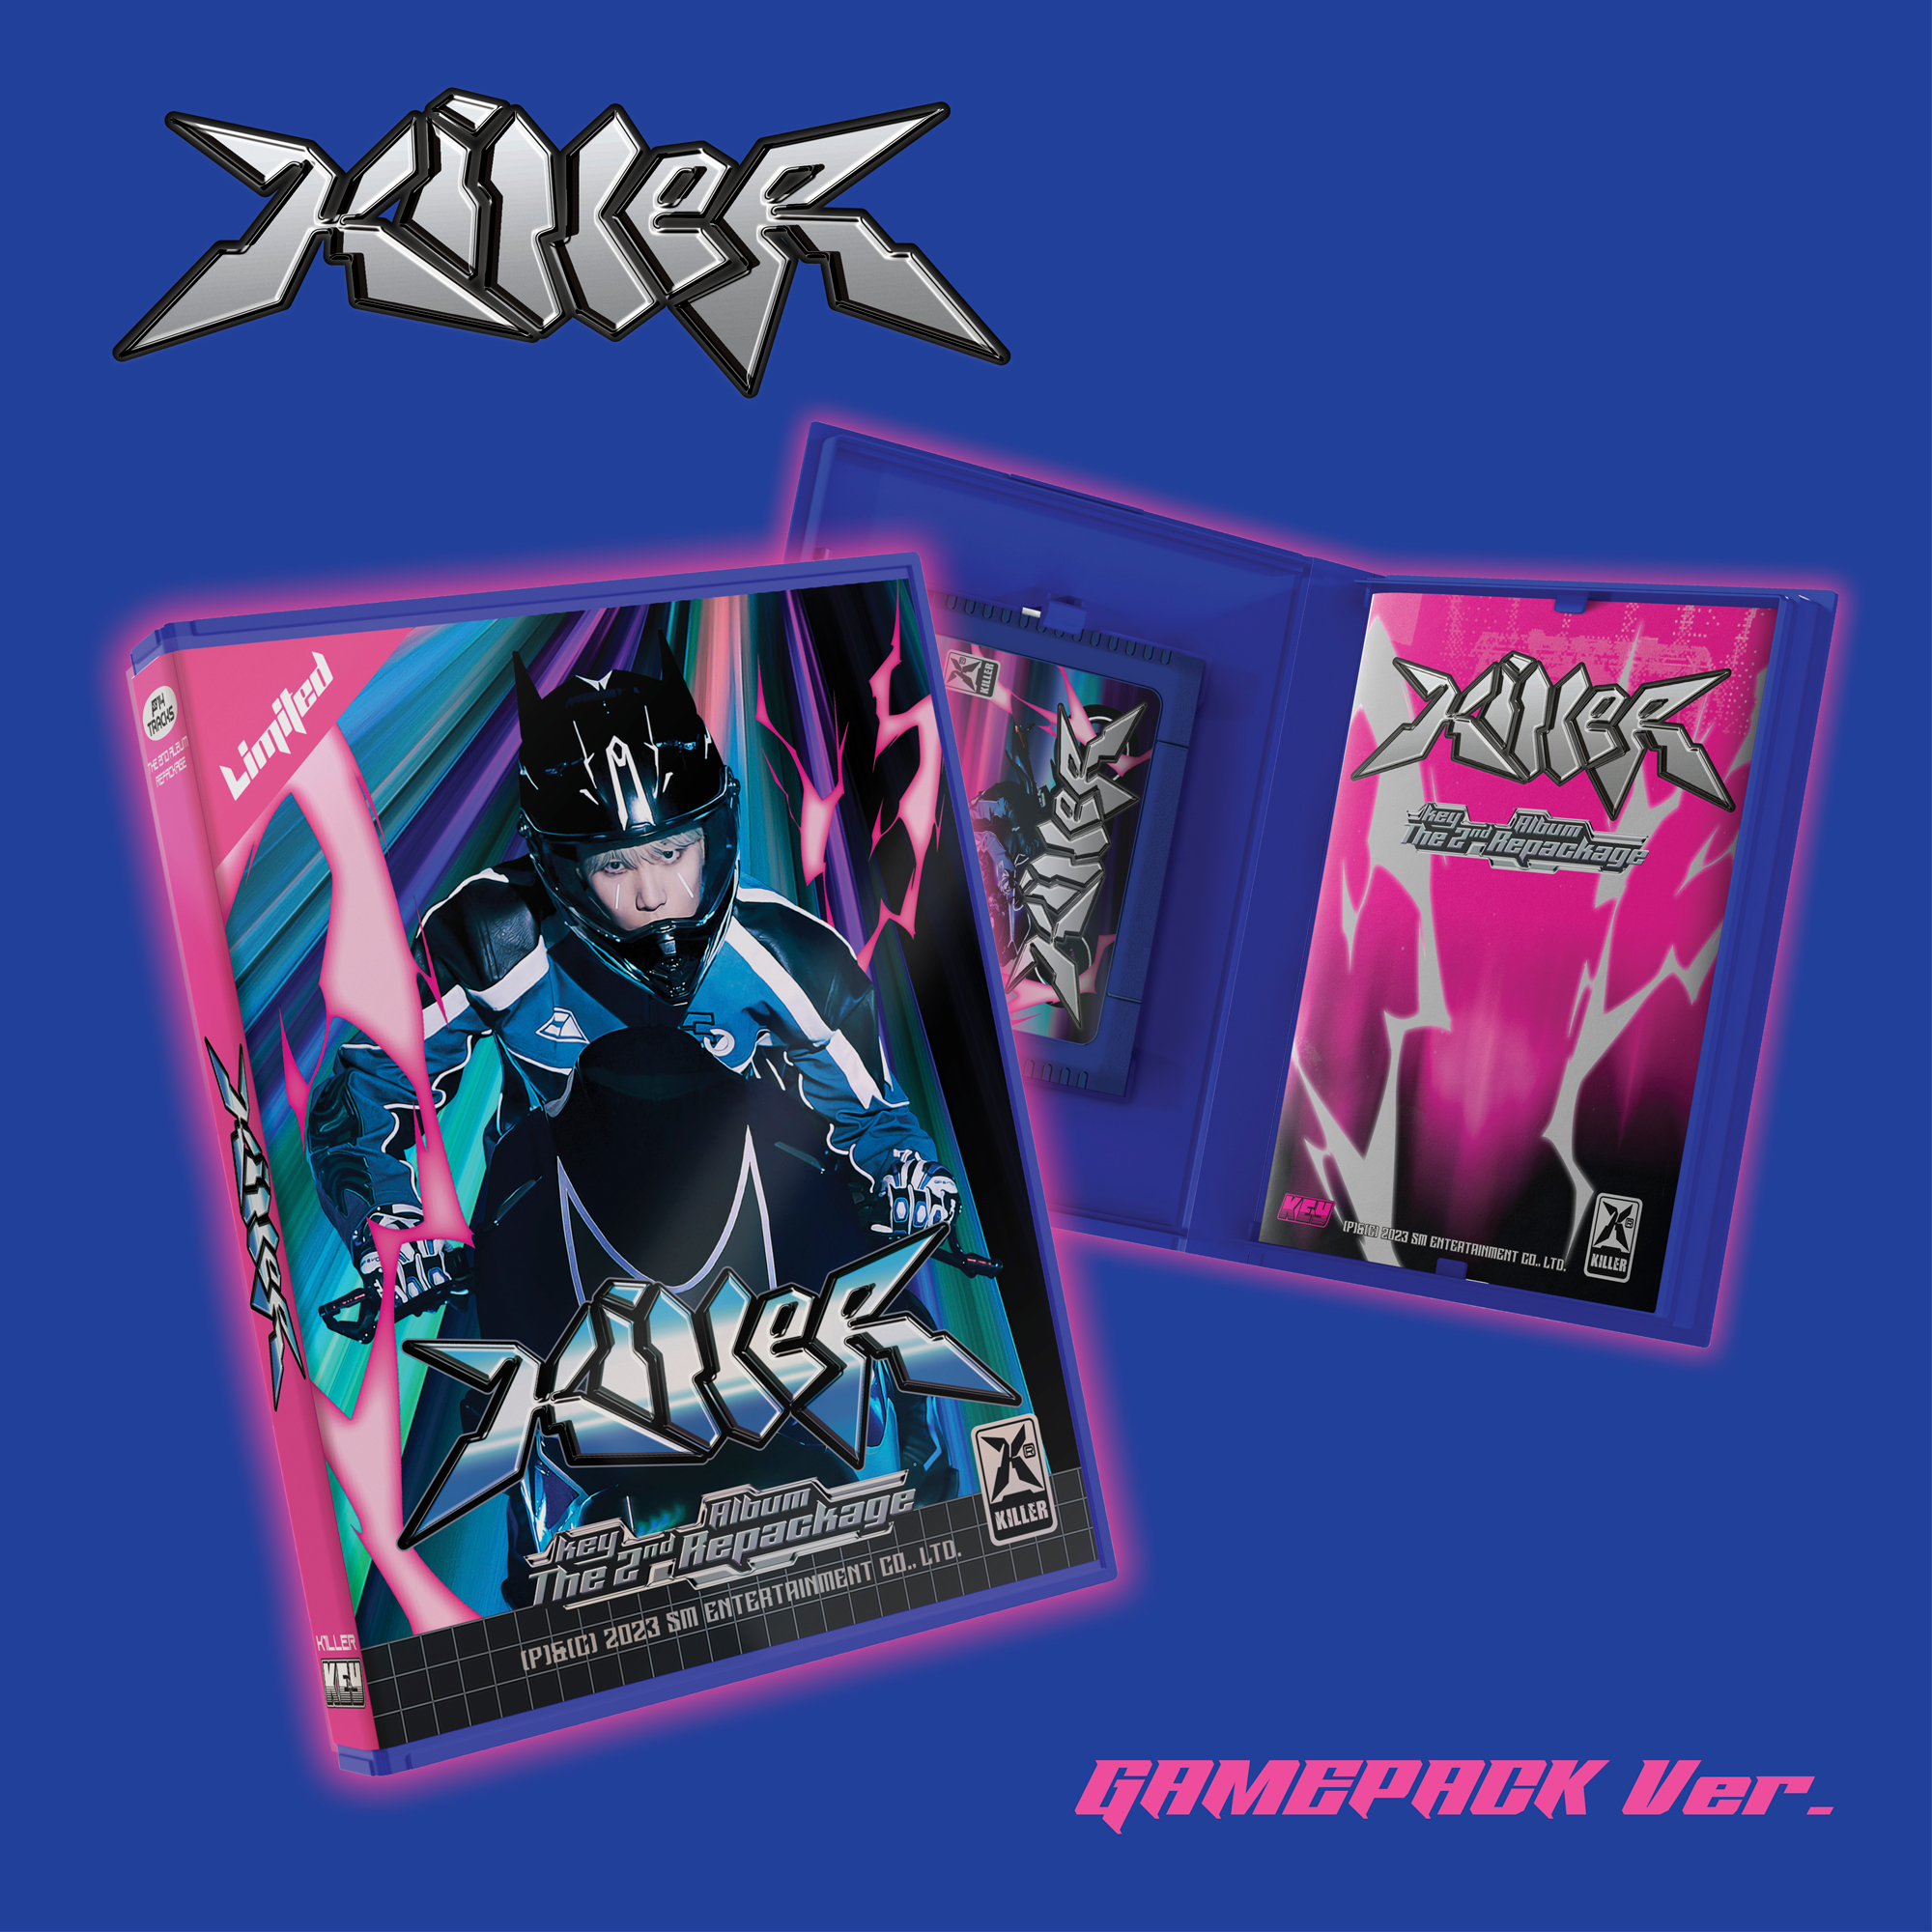 [@shineecharts] Key - The 2nd Album Repackage [Killer] (GAMEPACK Ver.) (First Press Limited Edition)